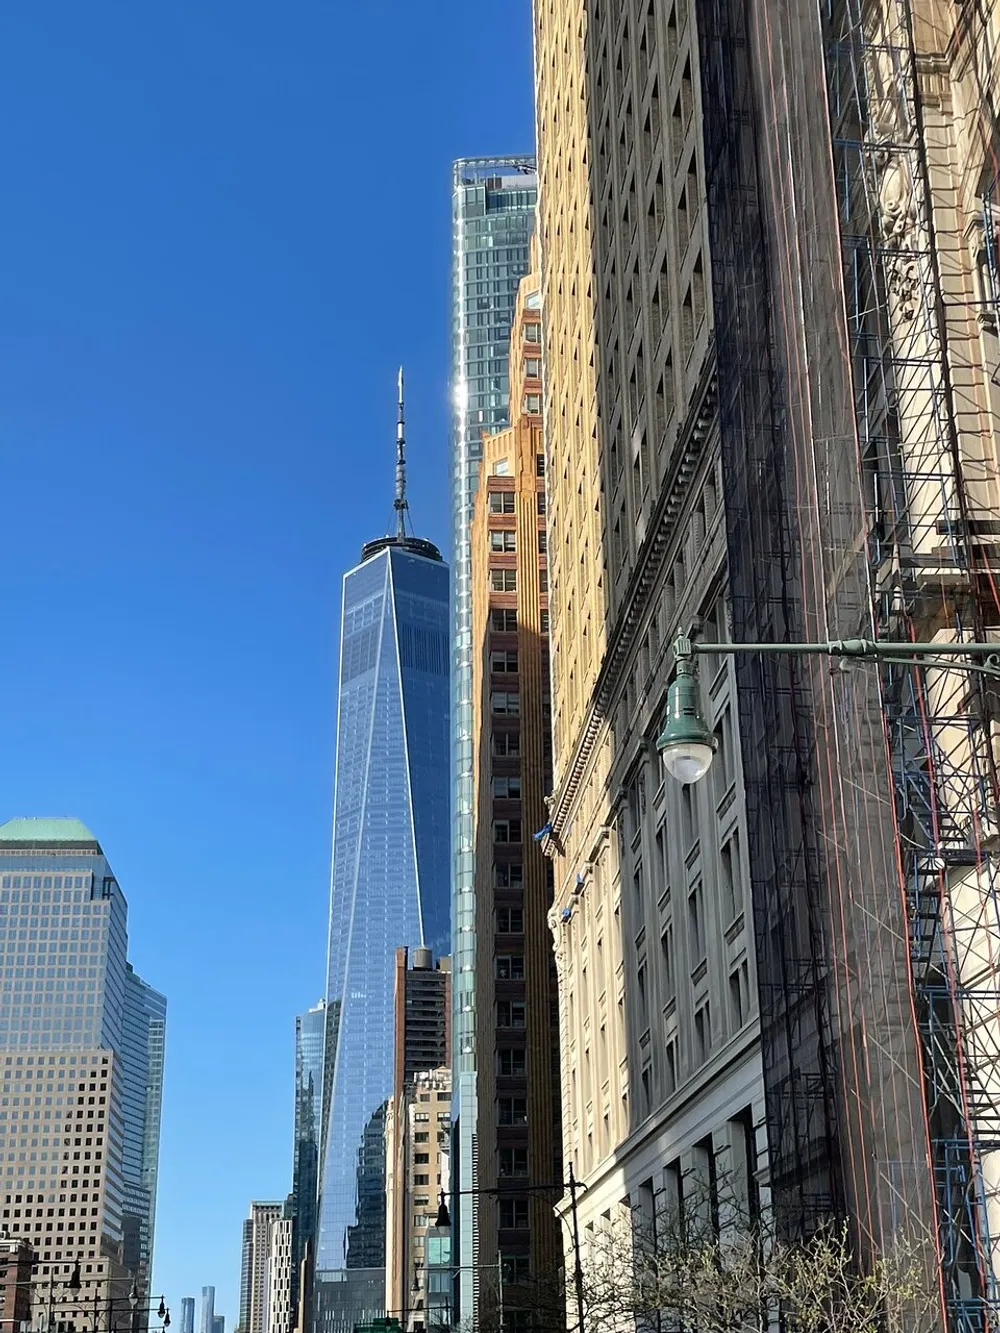 The image shows a view of the One World Trade Center amidst surrounding buildings against a clear blue sky with evidence of construction or renovation on the building in the foreground